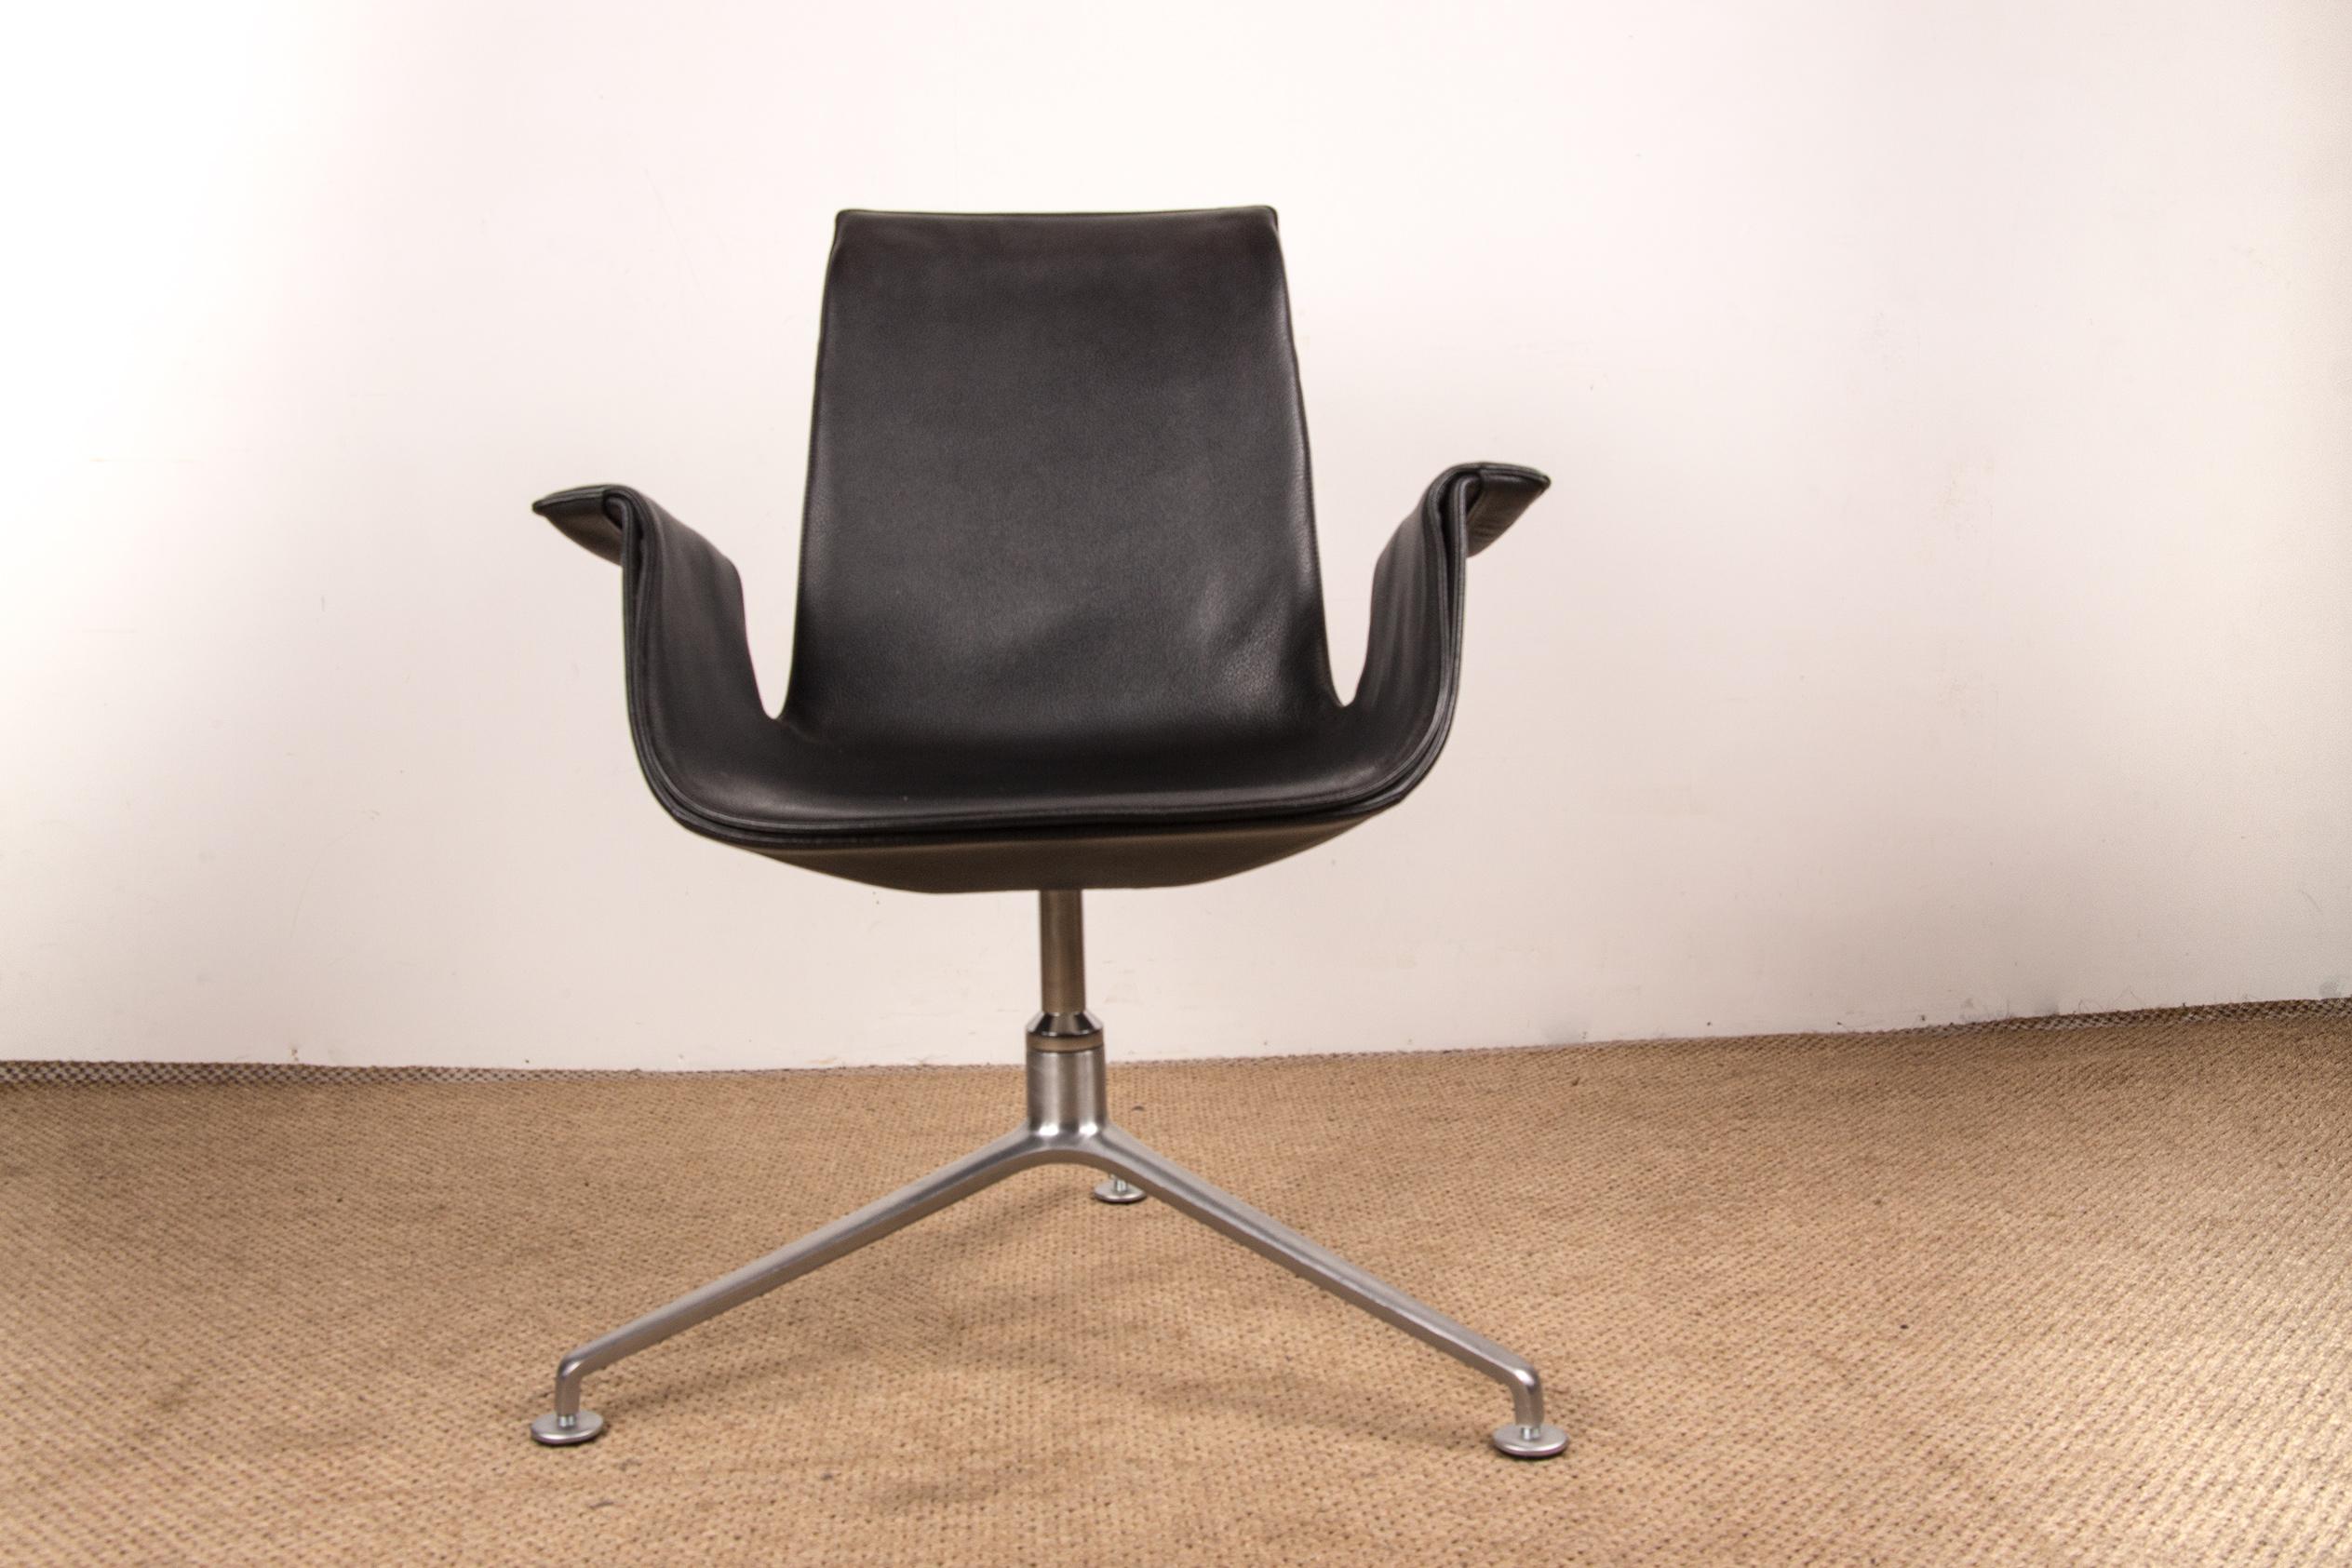 Superb Scandinavian armchair. Structure with three legs in Chromed Steel, seats and backs in cowhide leather in excellent condition. This piece of furniture comes from the premises of the International Automobile Federation at Place Vendôme in